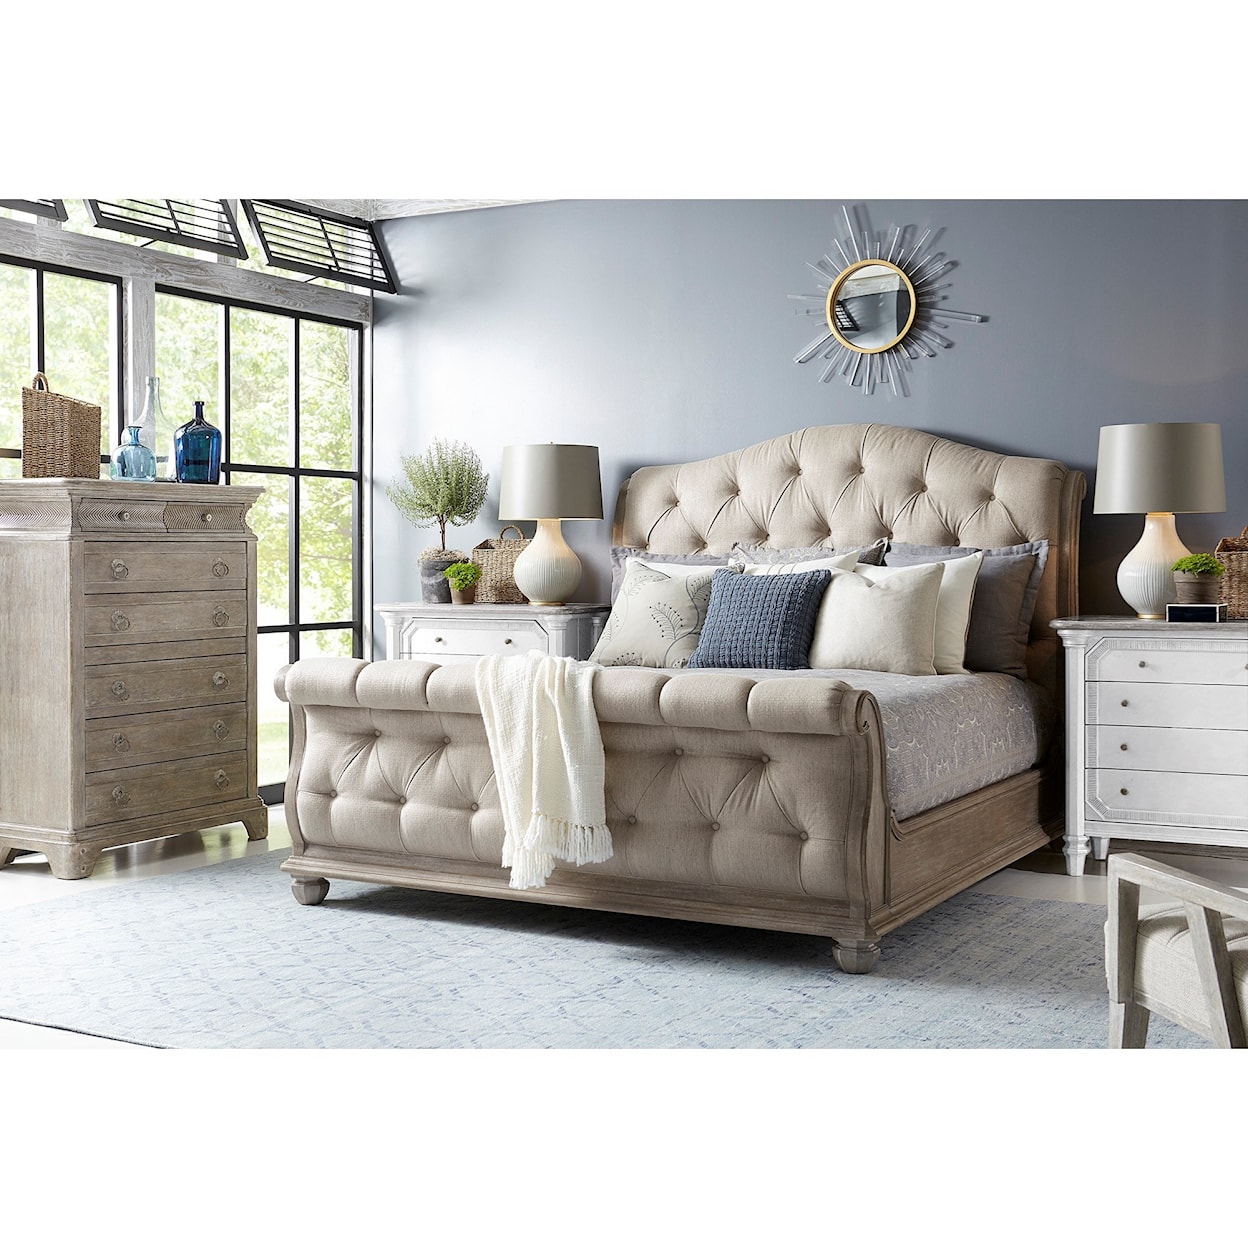 A.R.T. Furniture Inc Summer Creek  Upholstered California King Sleigh Bed